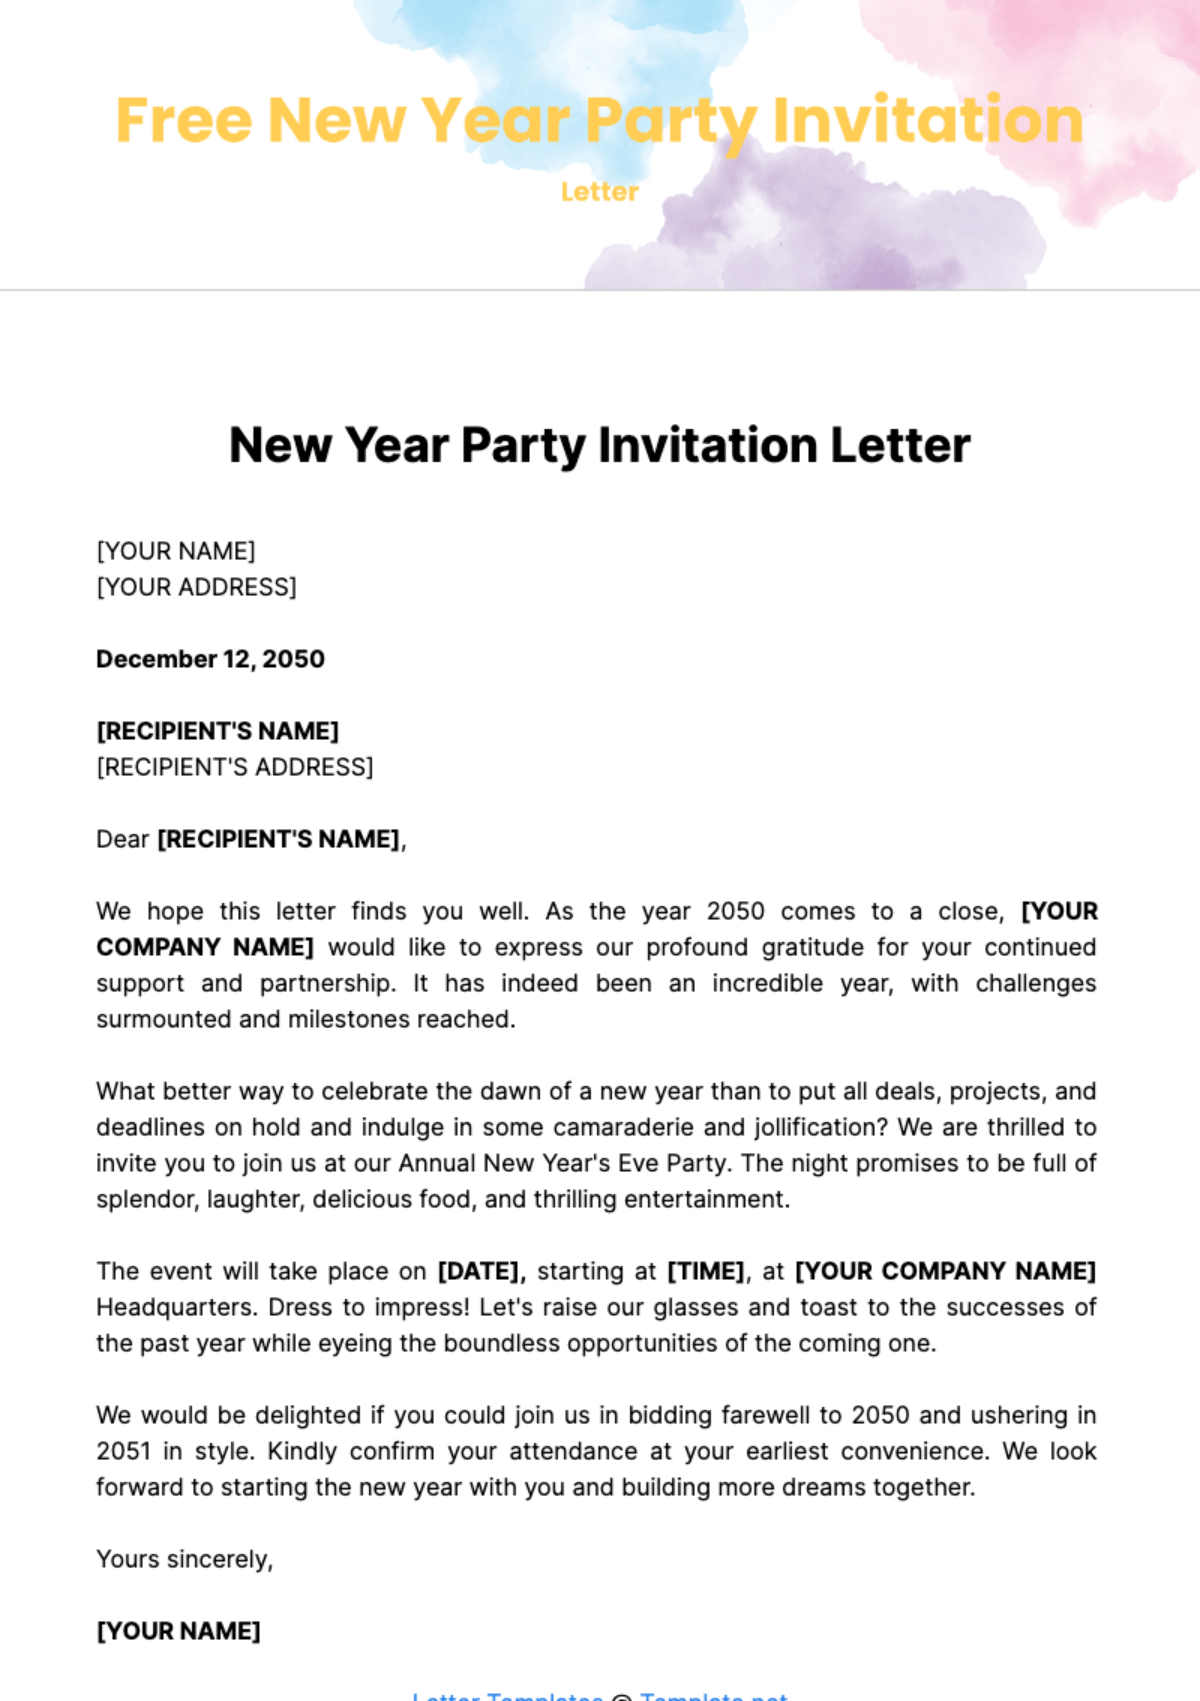 Free New Year Party Invitation Letter Template